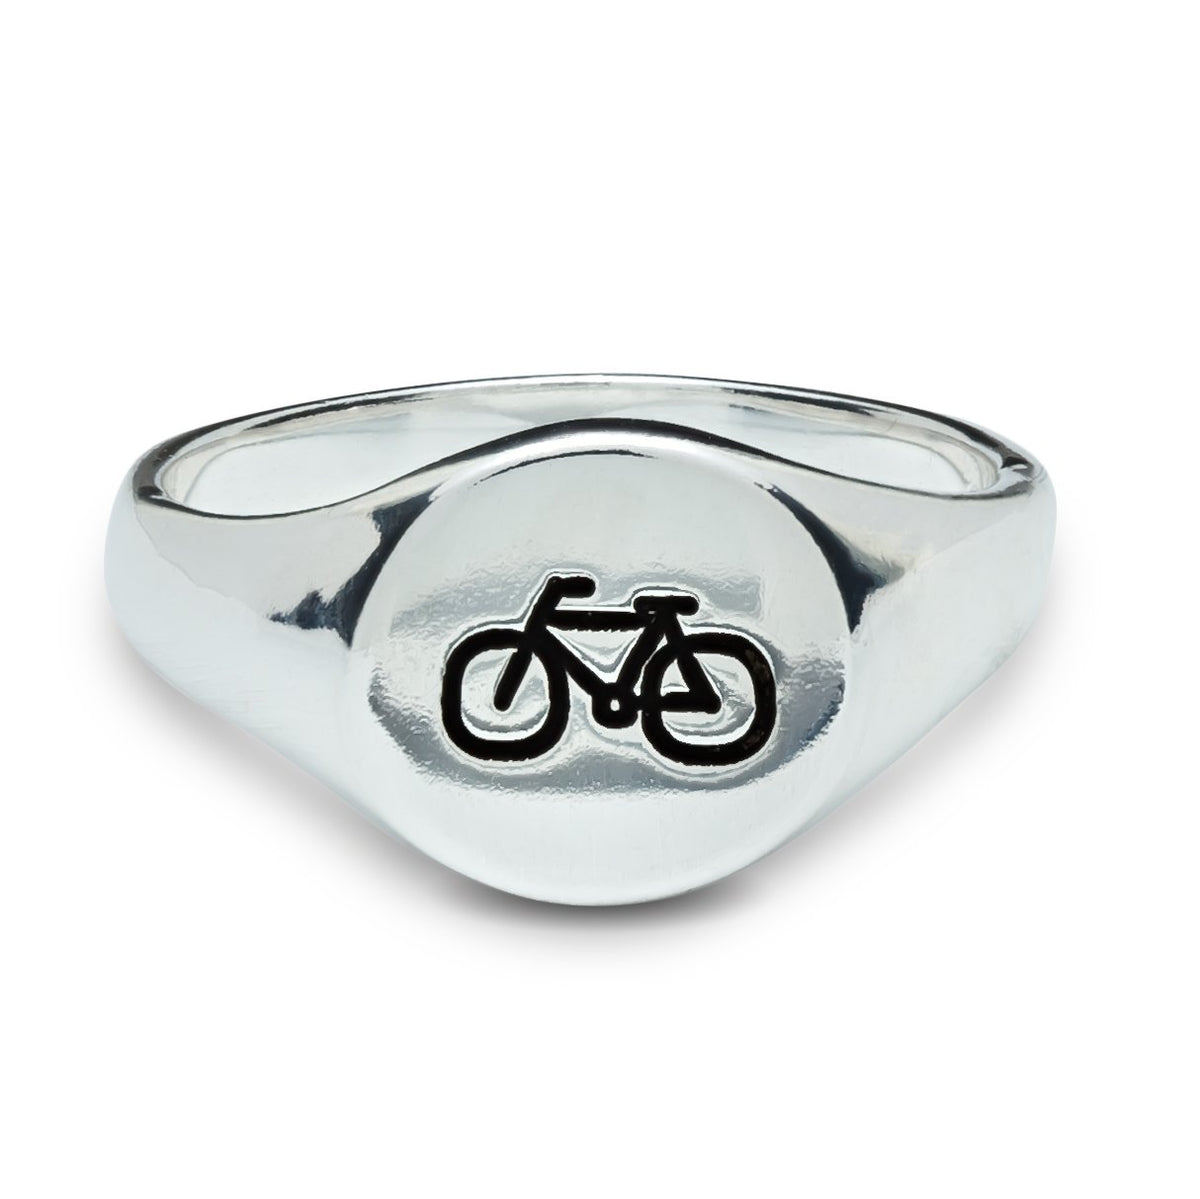 Silver Cyclist Signet Ring for men and women engraved with bike symbol from Off The Map Brighton